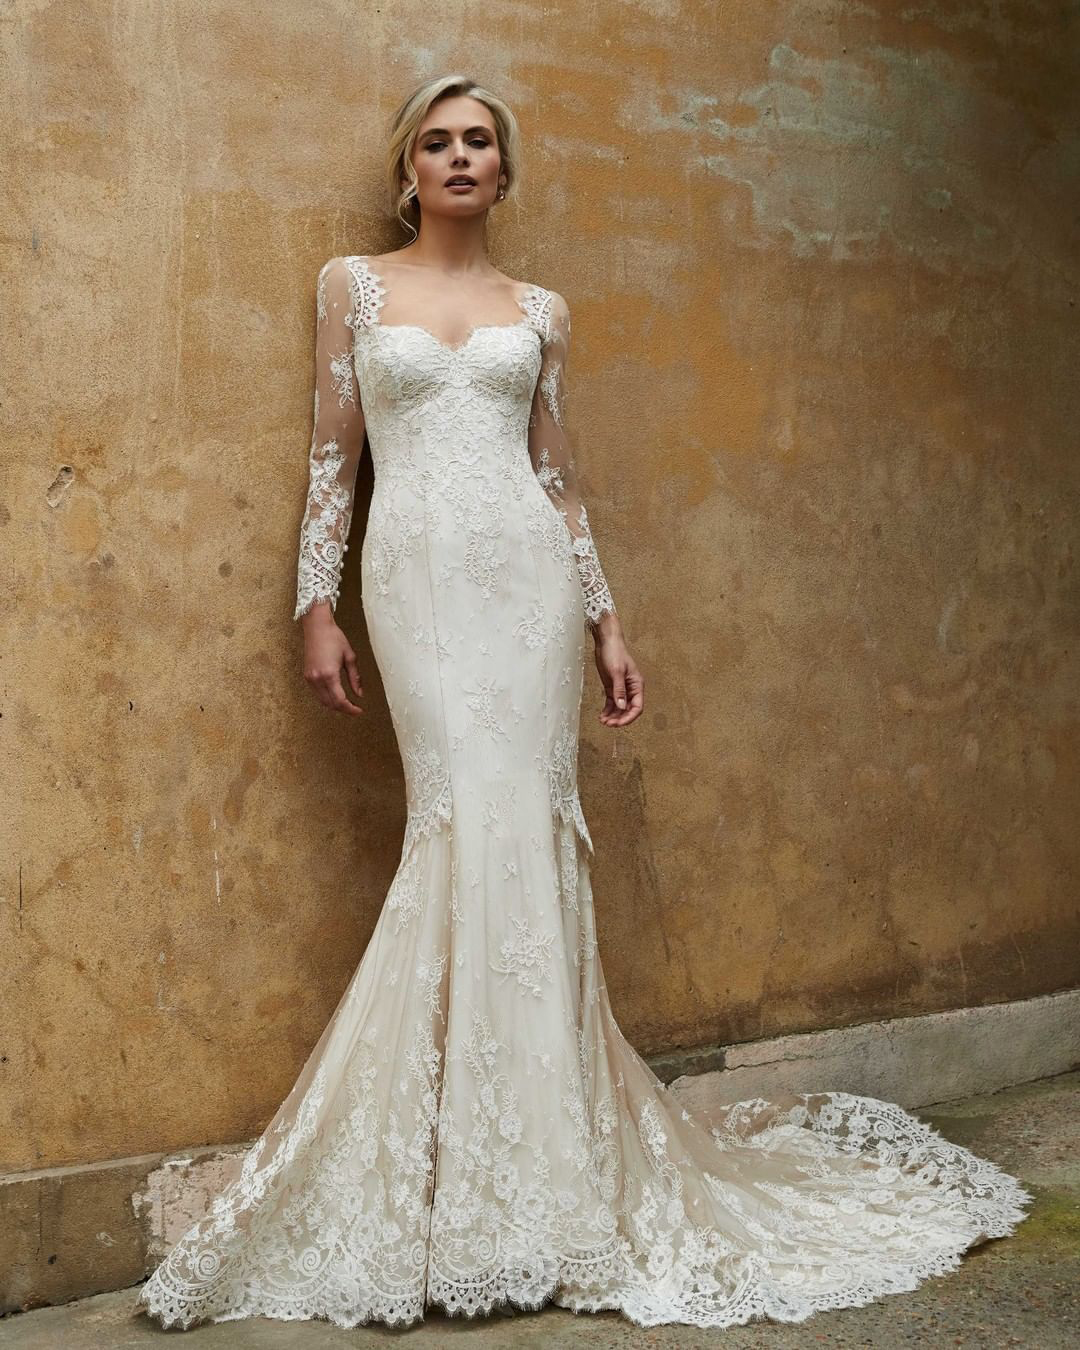 mermaid wedding dresses sweetheart neckline lace with long sleeves sassiholford